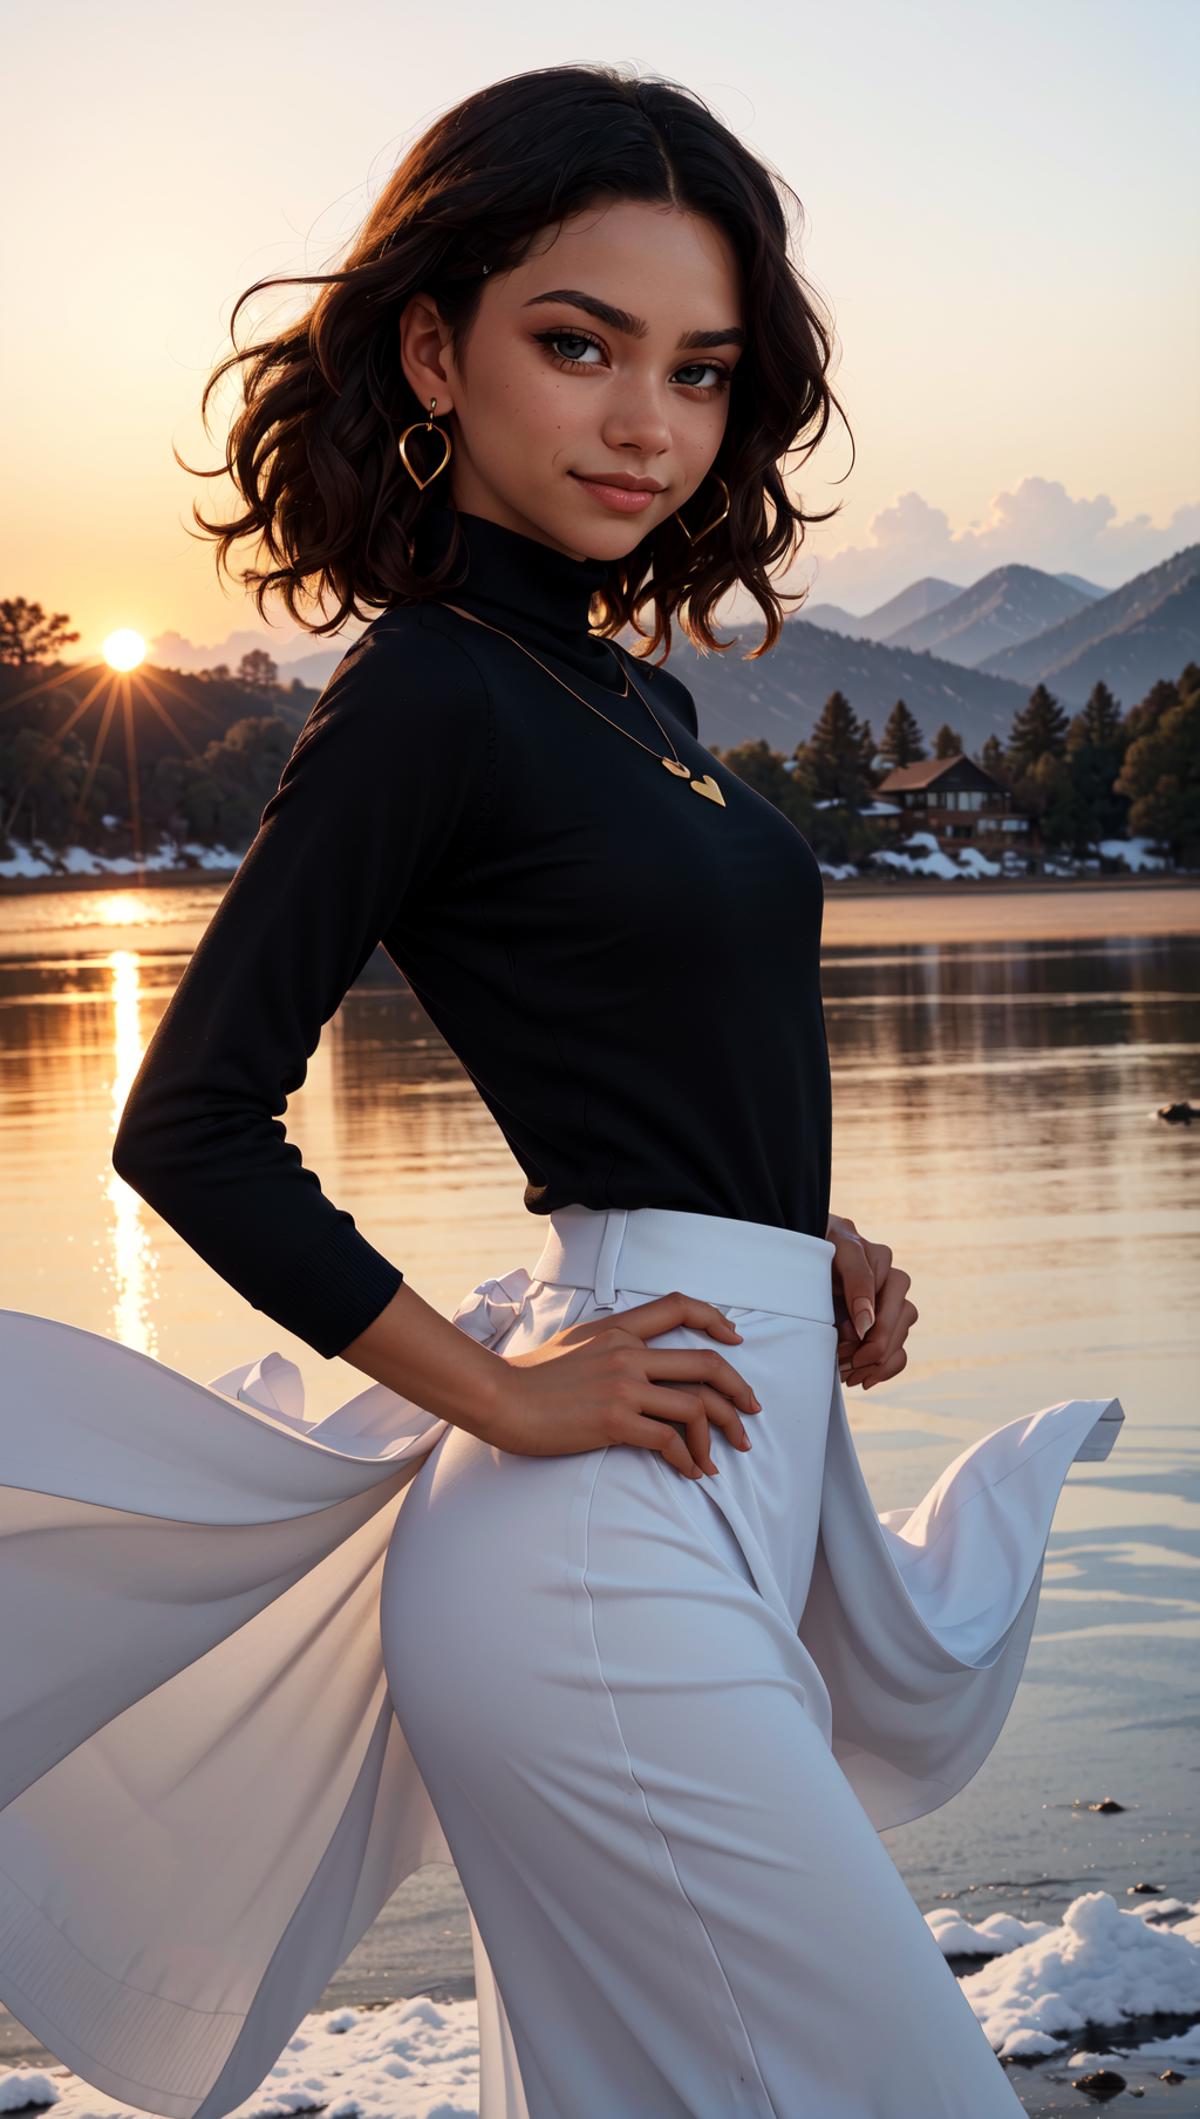 A woman posing by a lake in a black shirt and white pants.